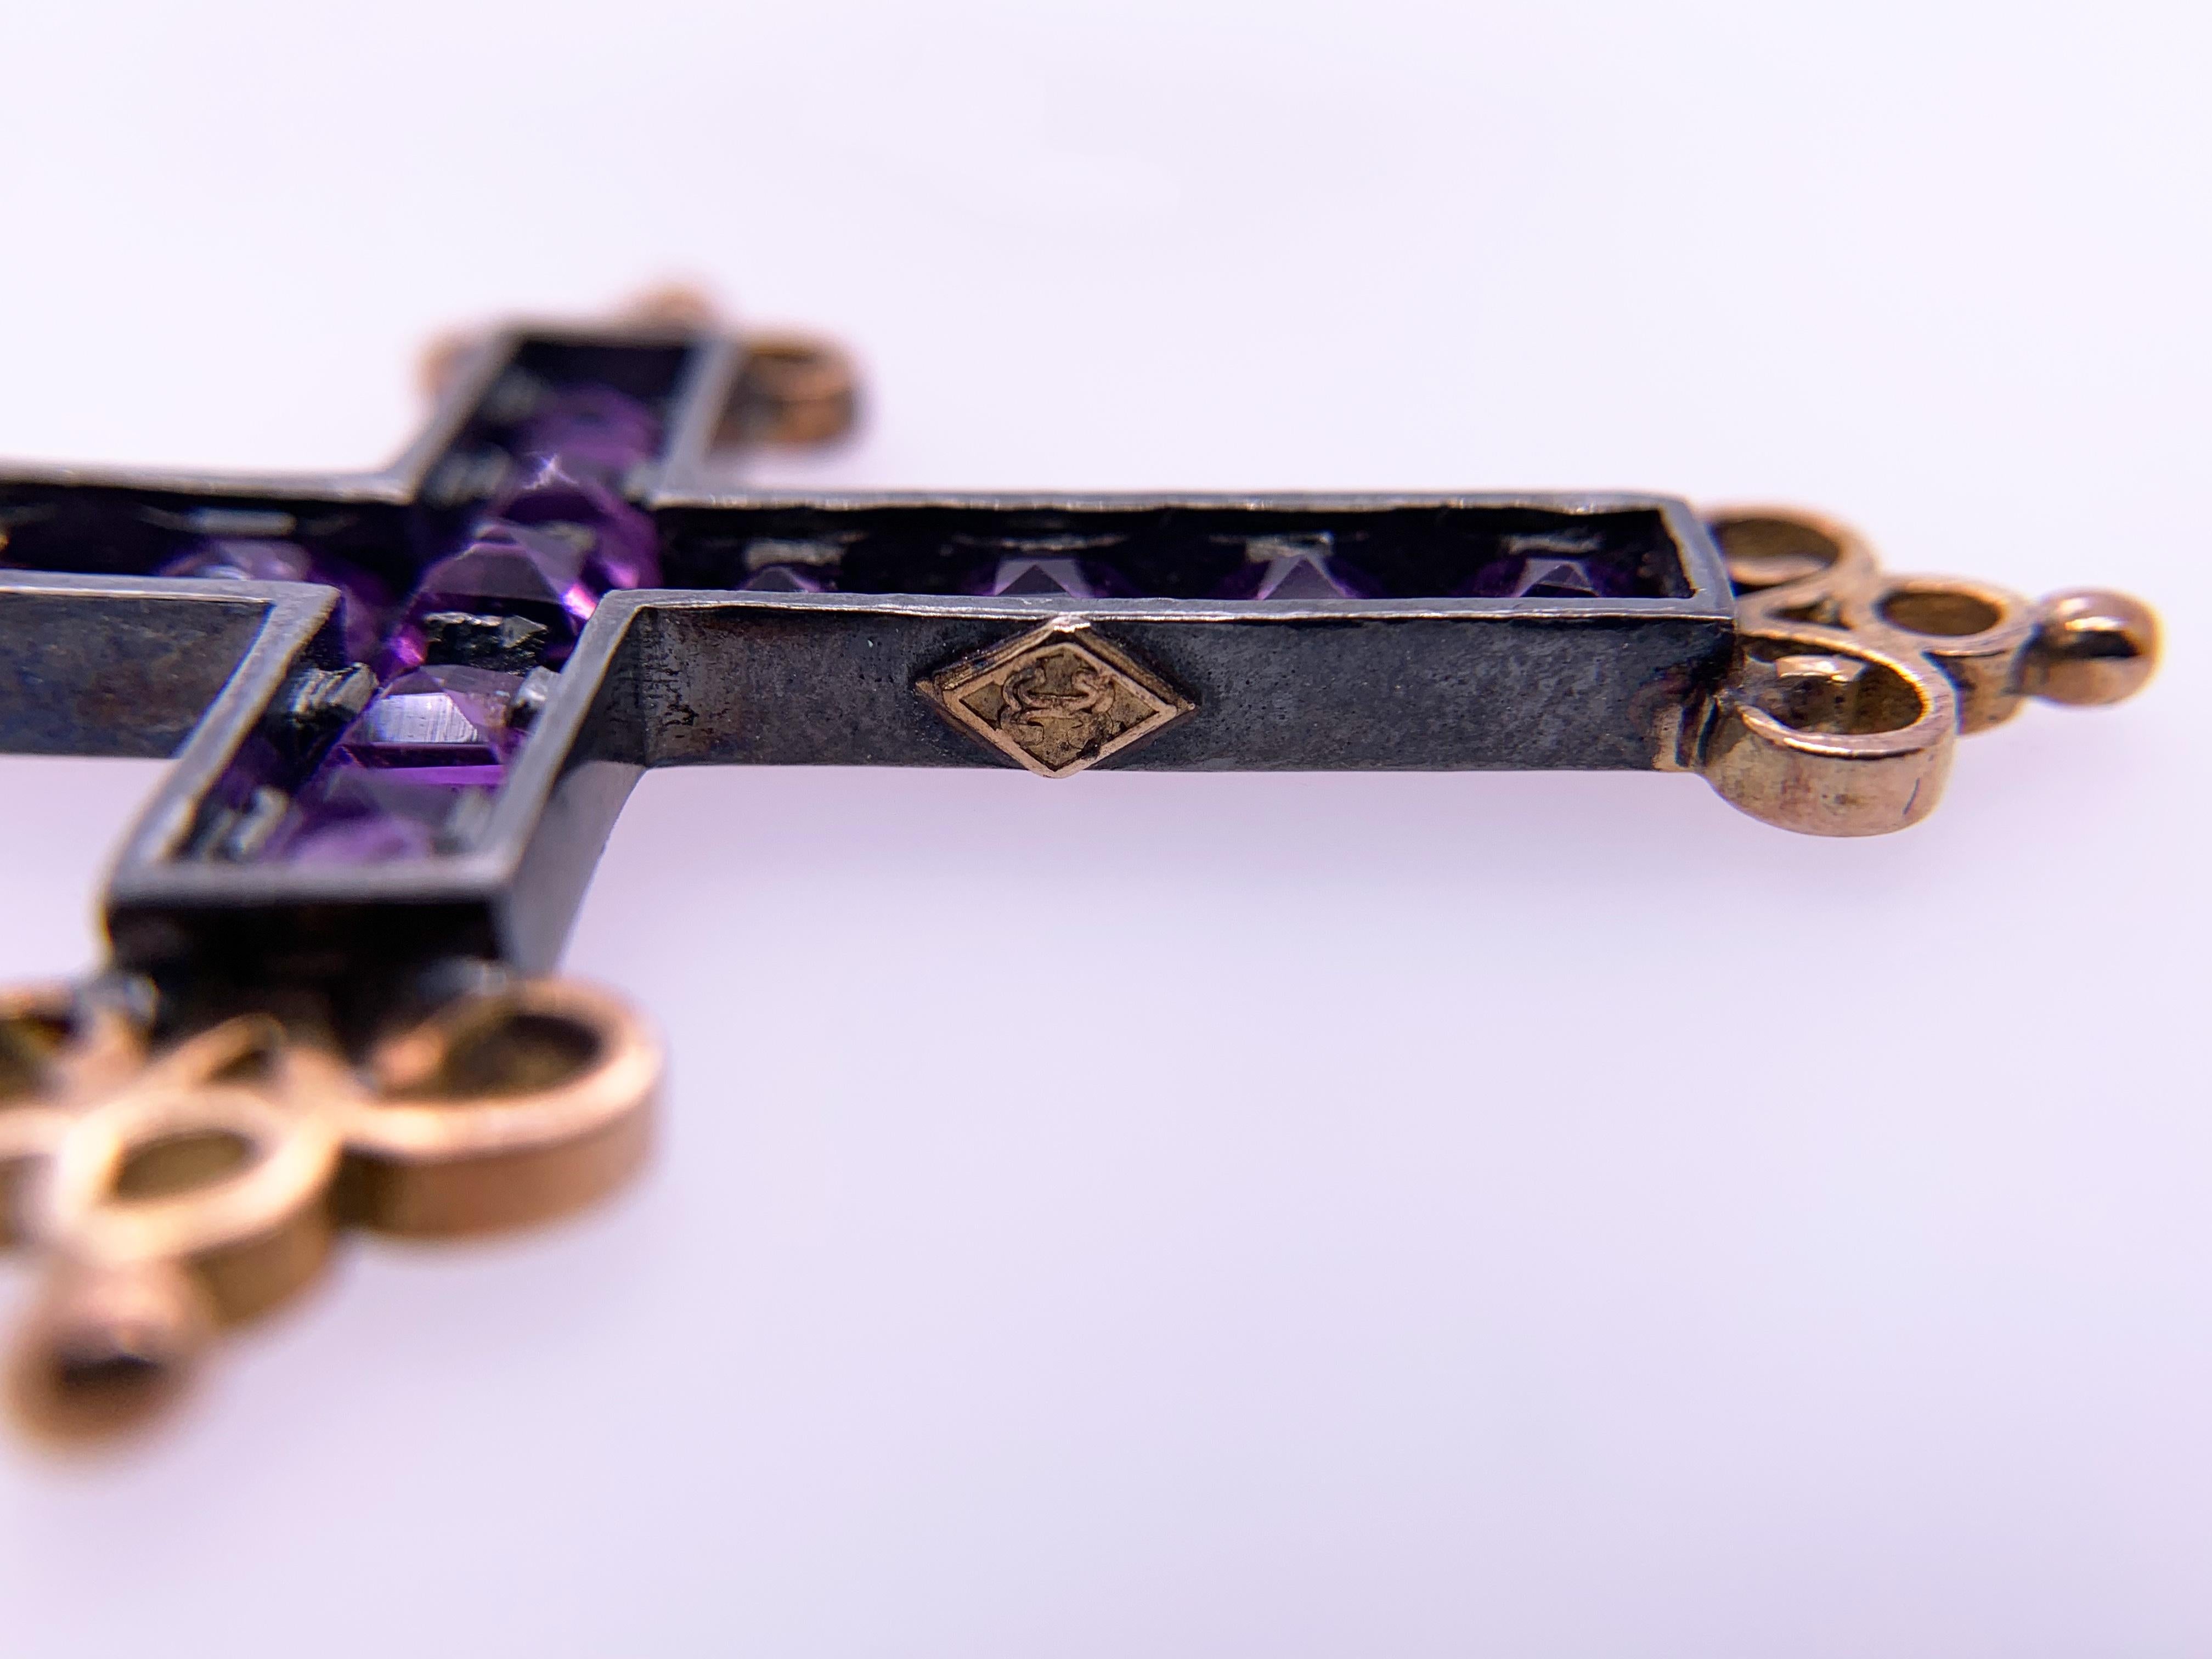 Amethyst Diamond Cross Pendant with Eleven square 4mm amethyst set individually. The amethyst are set into oxidized silver. The18kt oxidized yellow gold scrolls at the ends are a nice color contrast between the oxidized silver and gold. The bale is